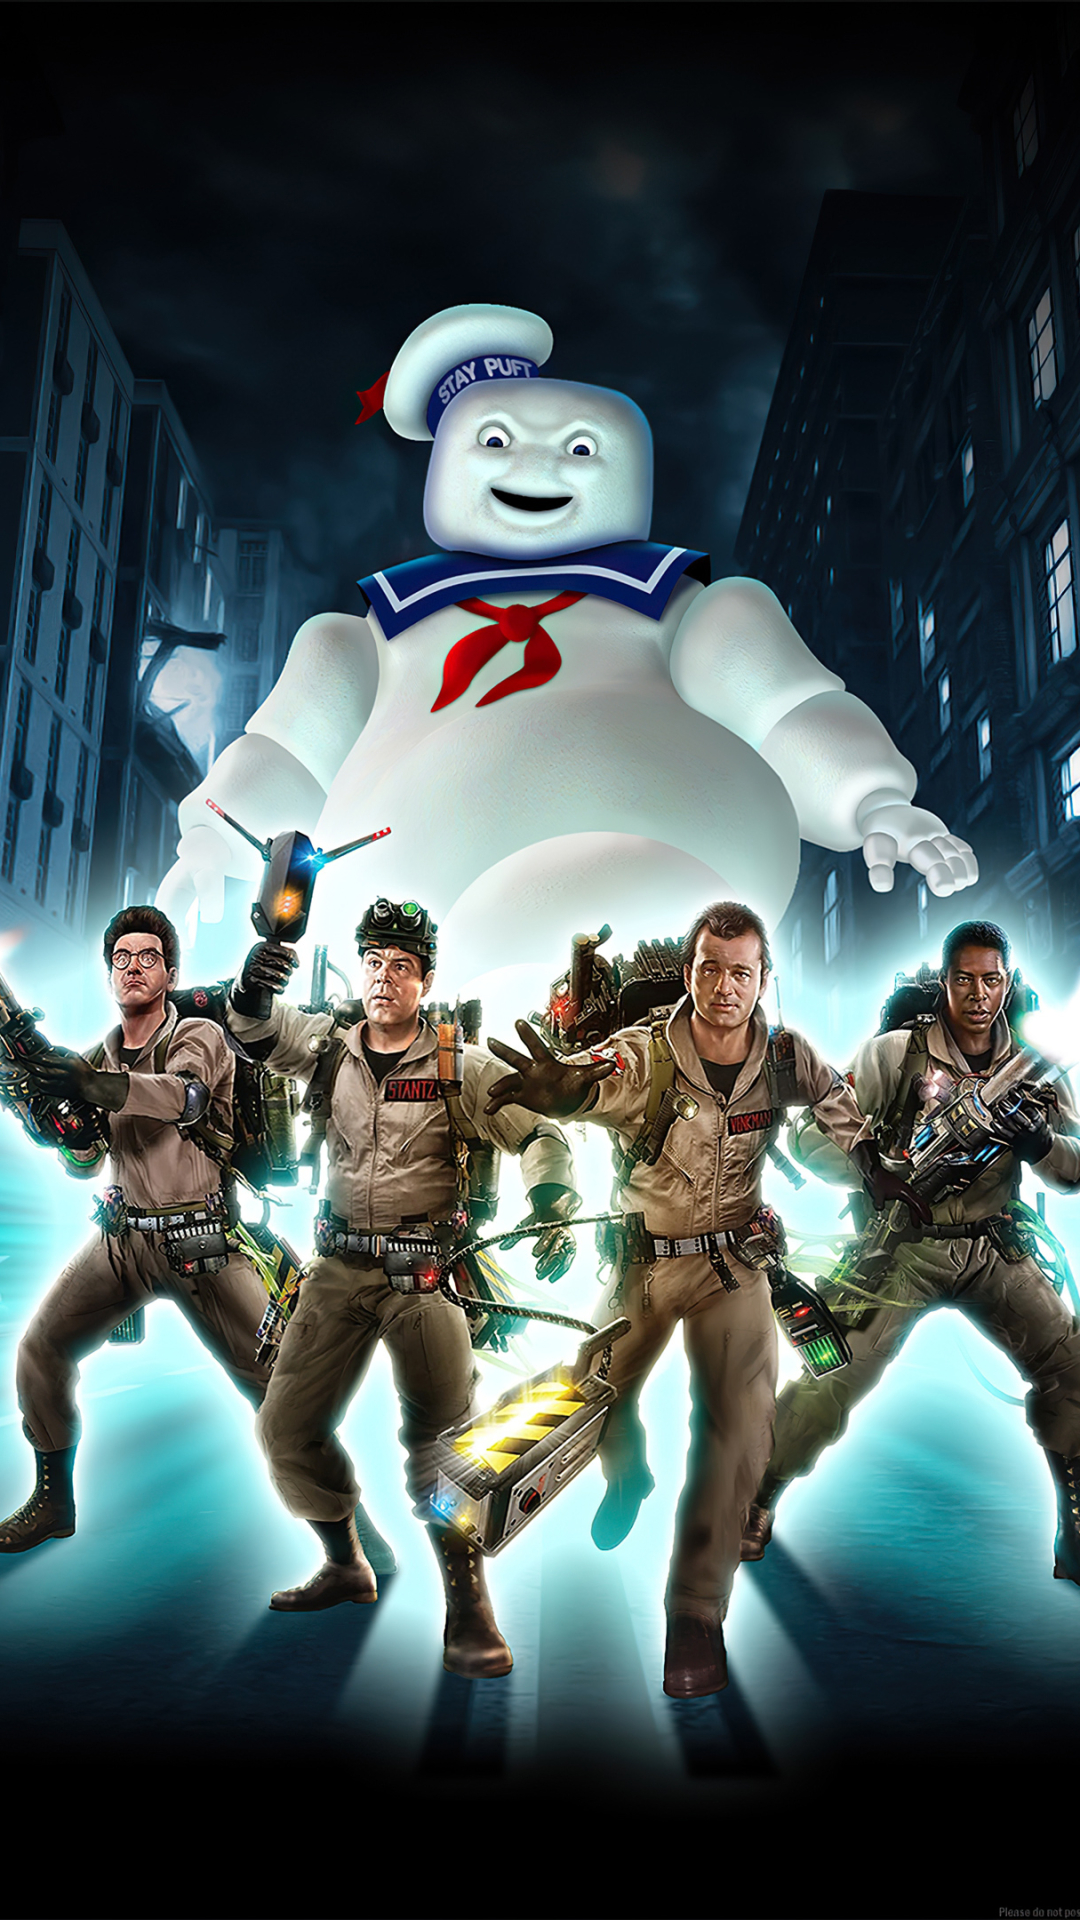 stay puft marshmallow man, ghostbusters, video game, ghostbusters: the video game